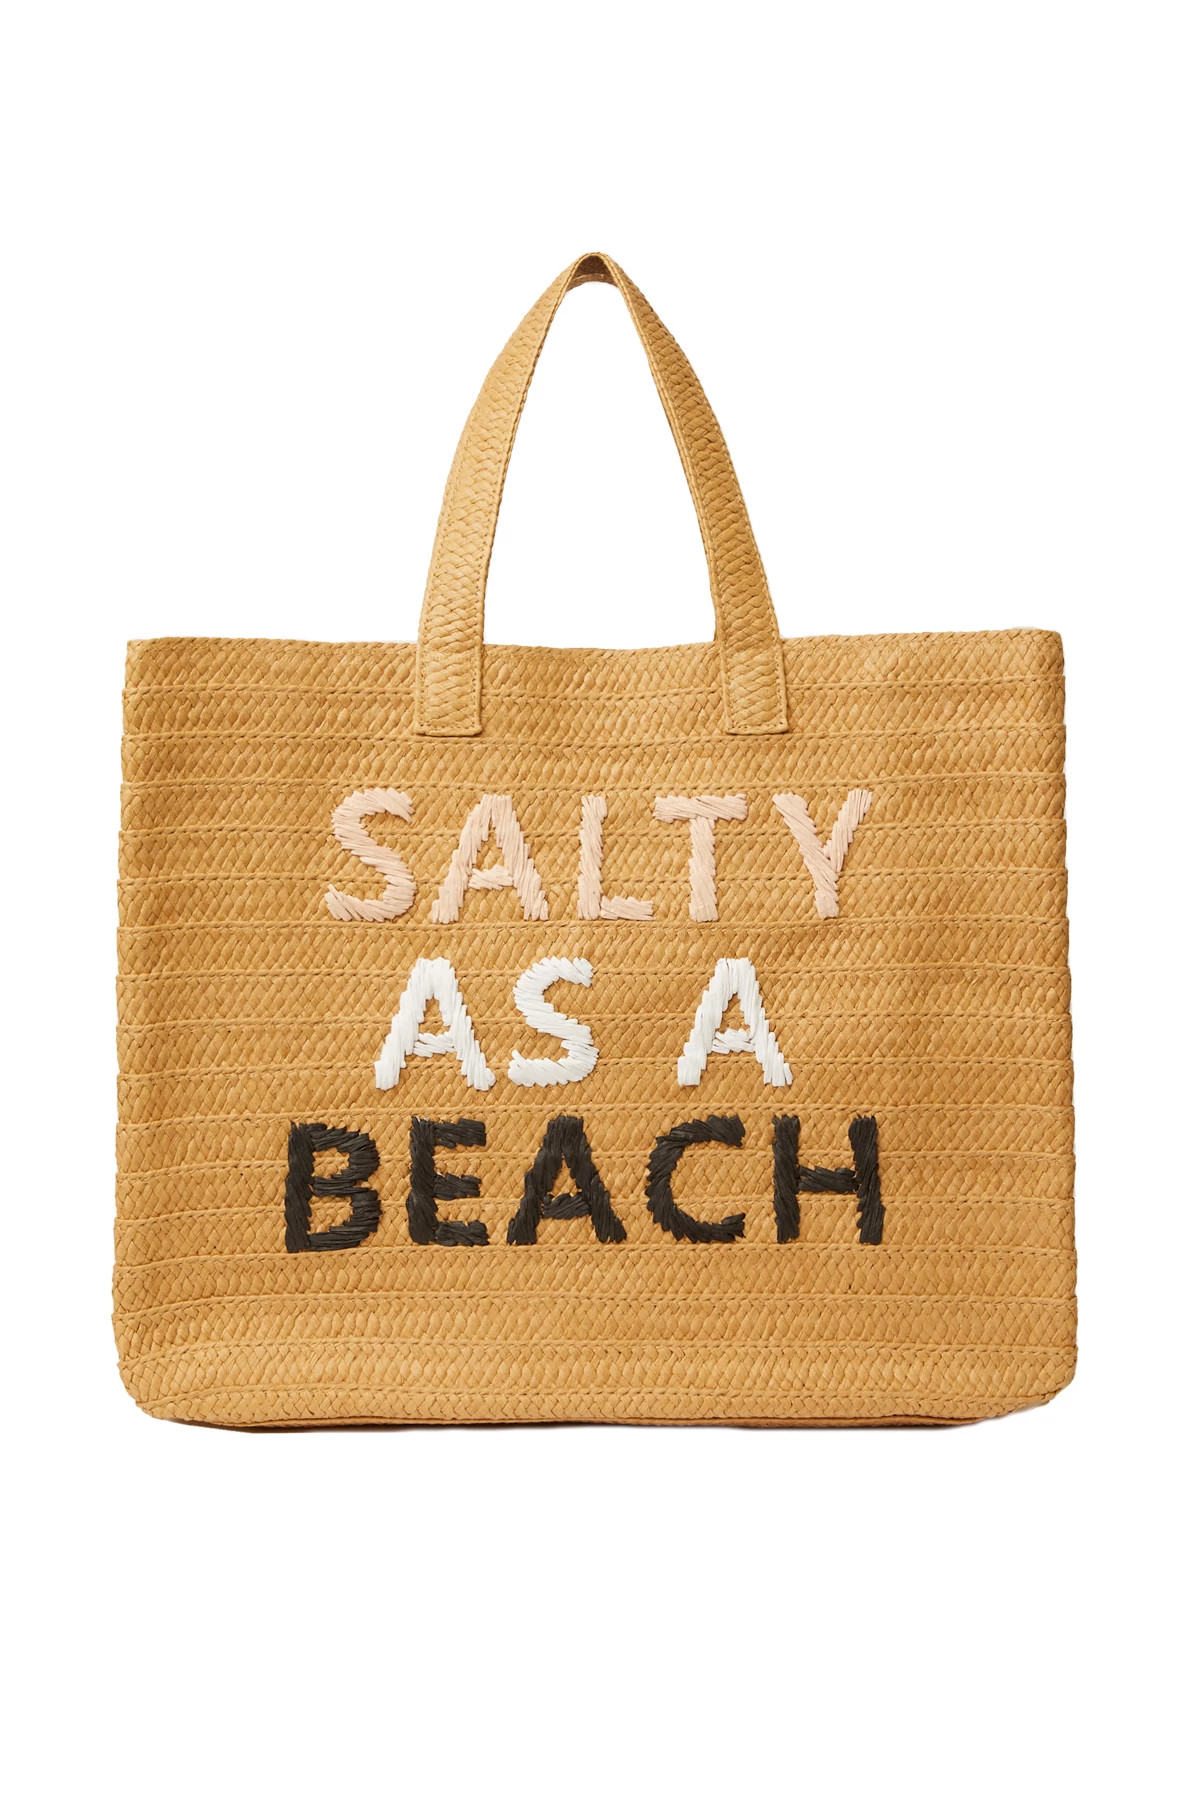 BLDW Salty as a Beach Tote image number 1